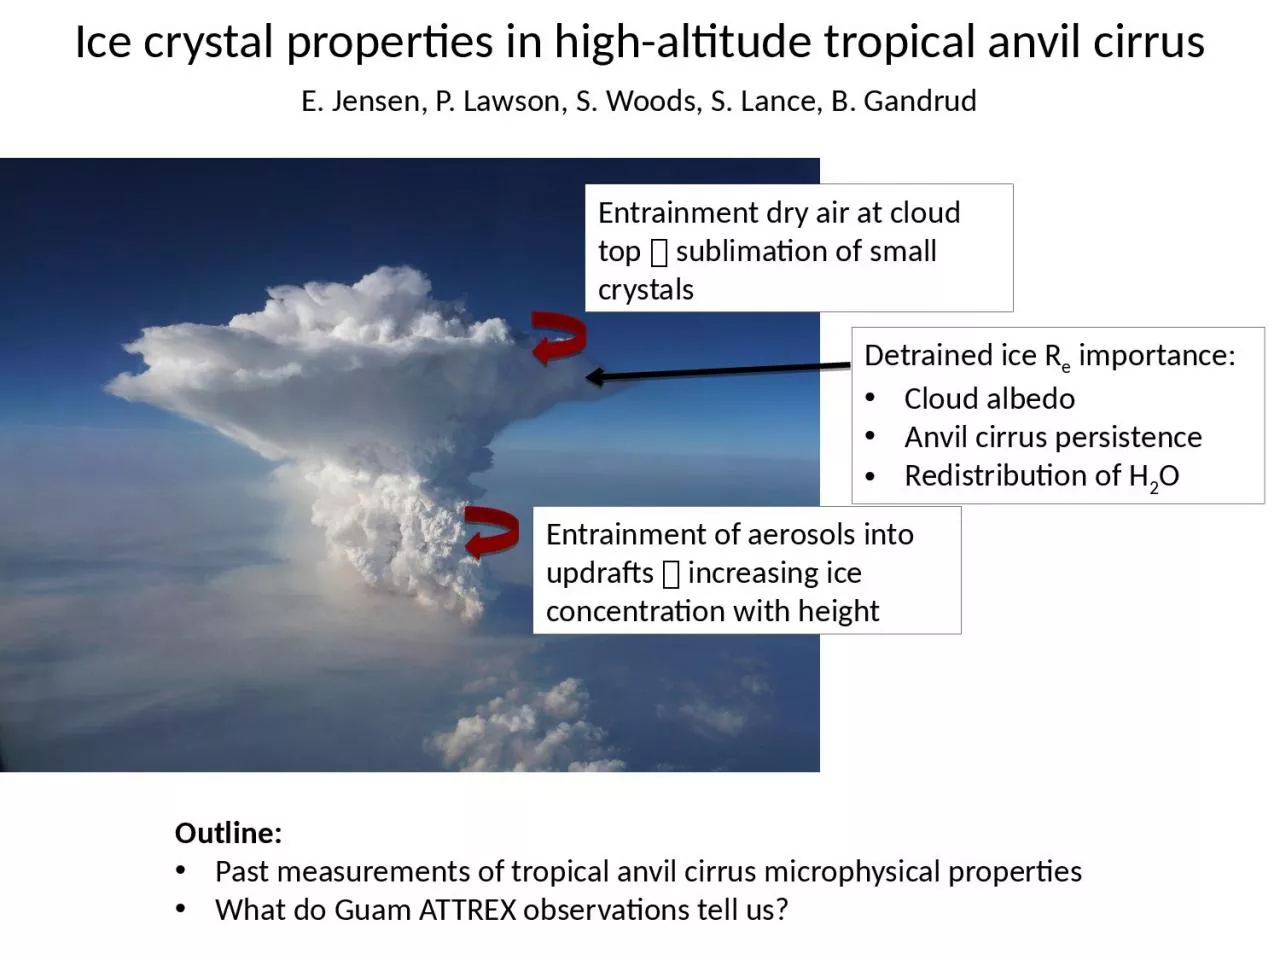 Ice crystal properties in high-altitude tropical anvil cirrus